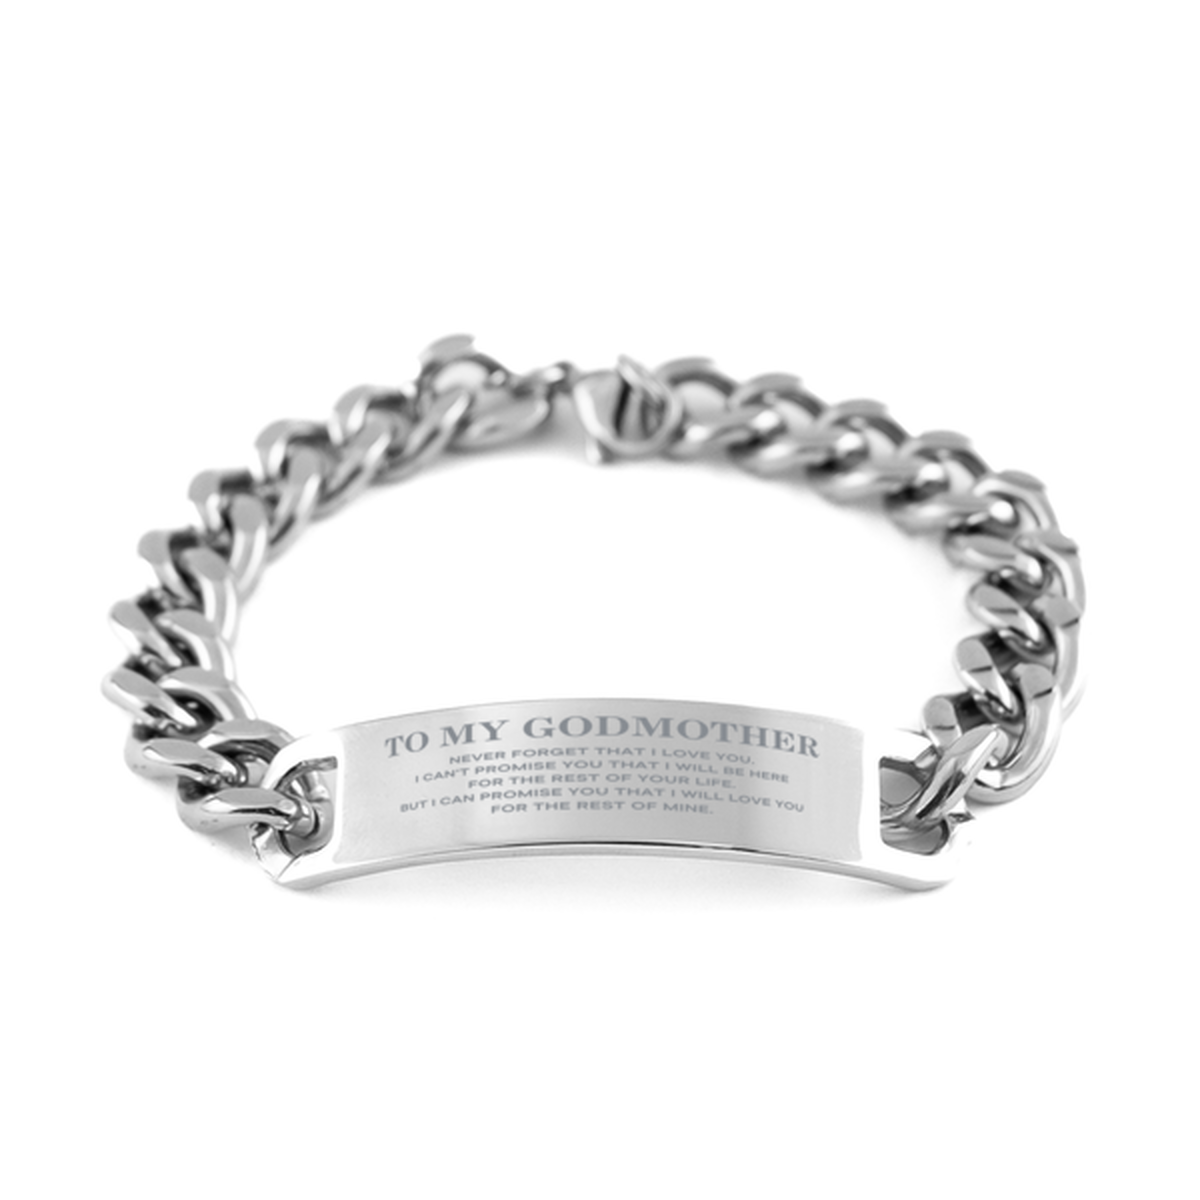 To My Godmother Gifts, I will love you for the rest of mine, Love Godmother Bracelet, Birthday Christmas Unique Cuban Chain Stainless Steel Bracelet For Godmother